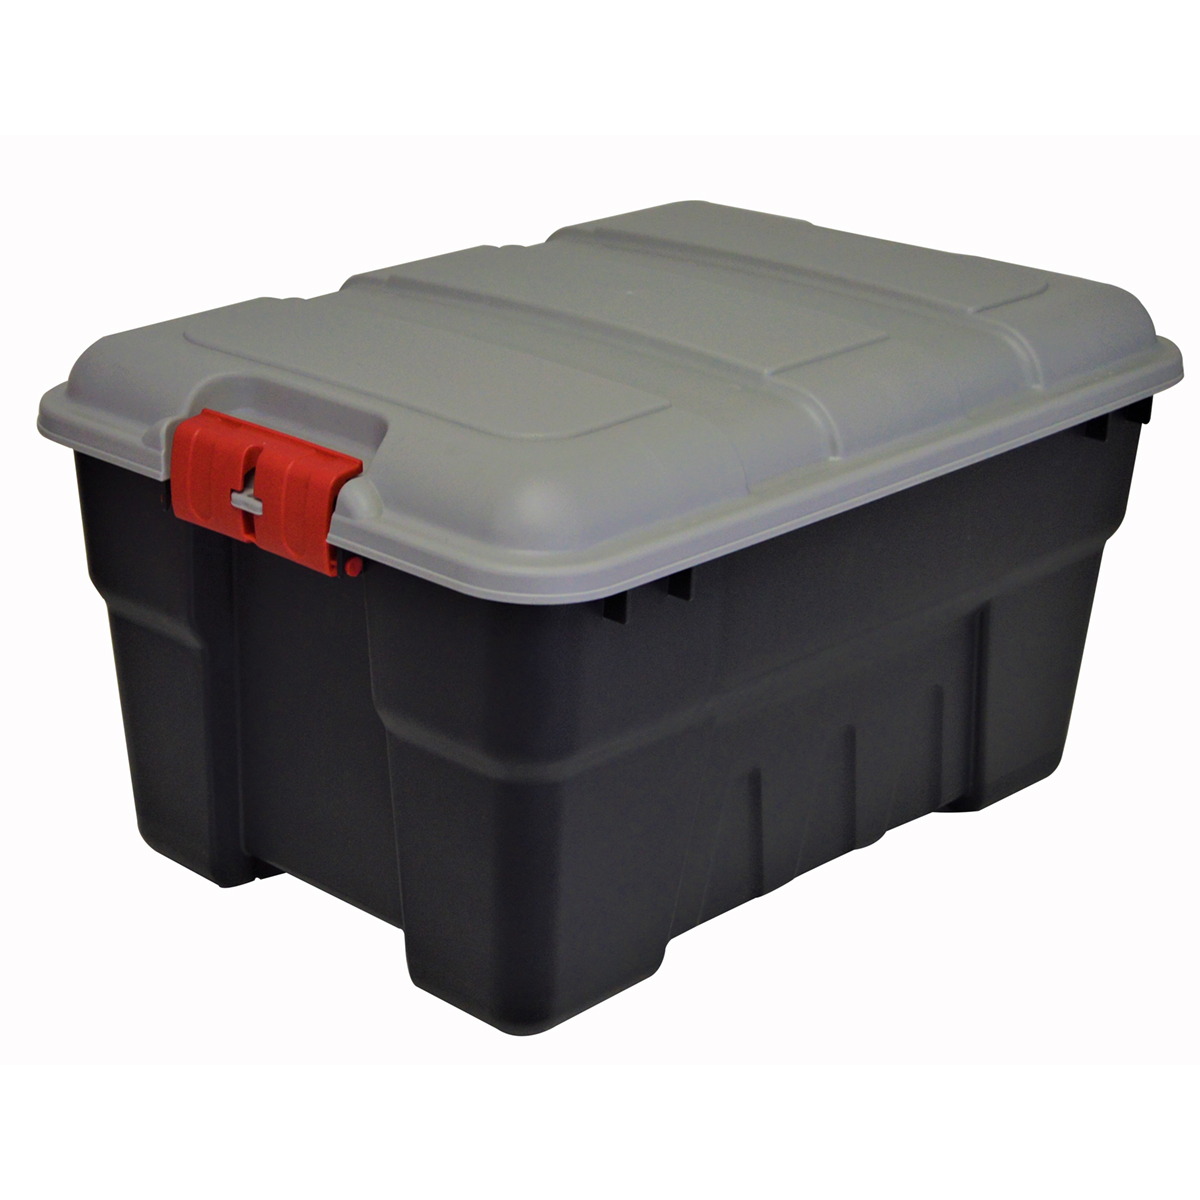 https://www.unitedsolutions.net/wp-content/uploads/2022/09/14-Gallon-Tote-Angle-View.jpg